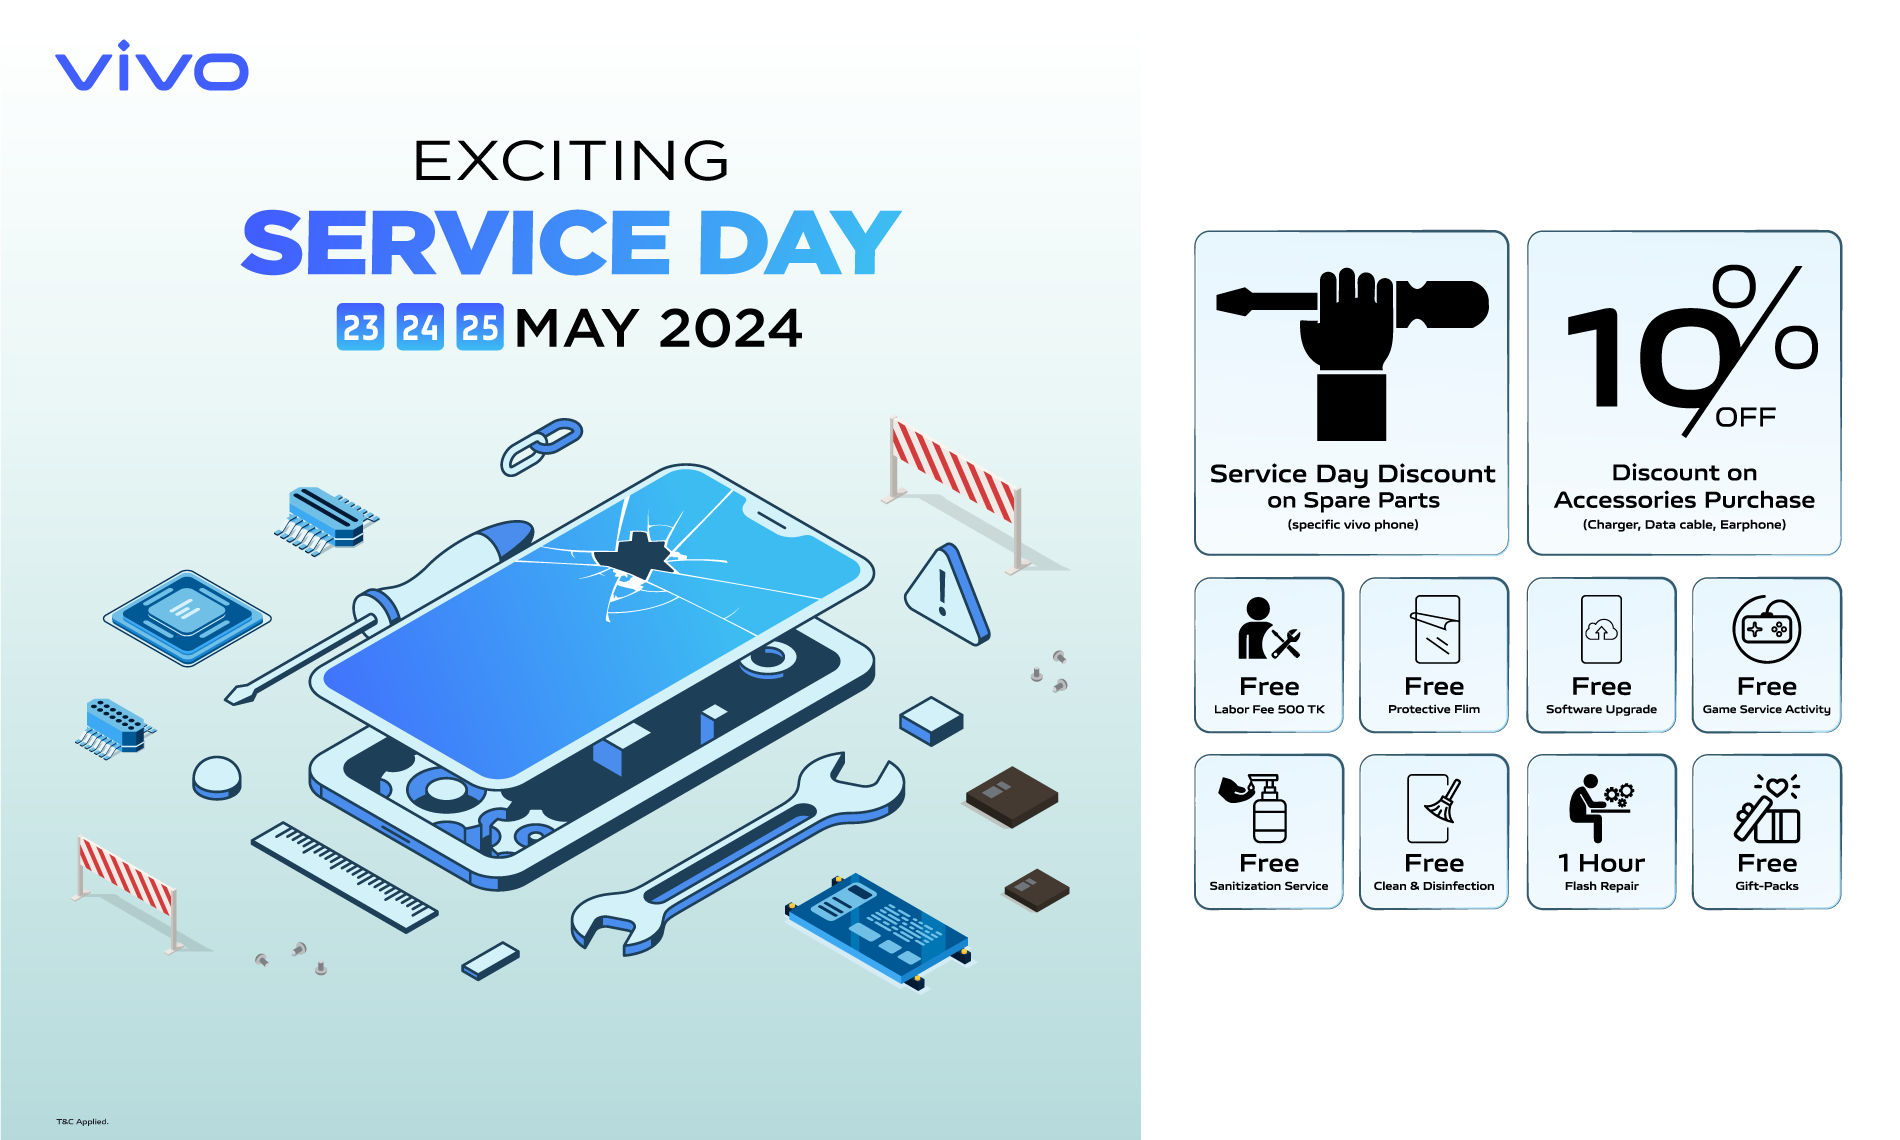 Discover Exclusive Offers at vivo Service Day